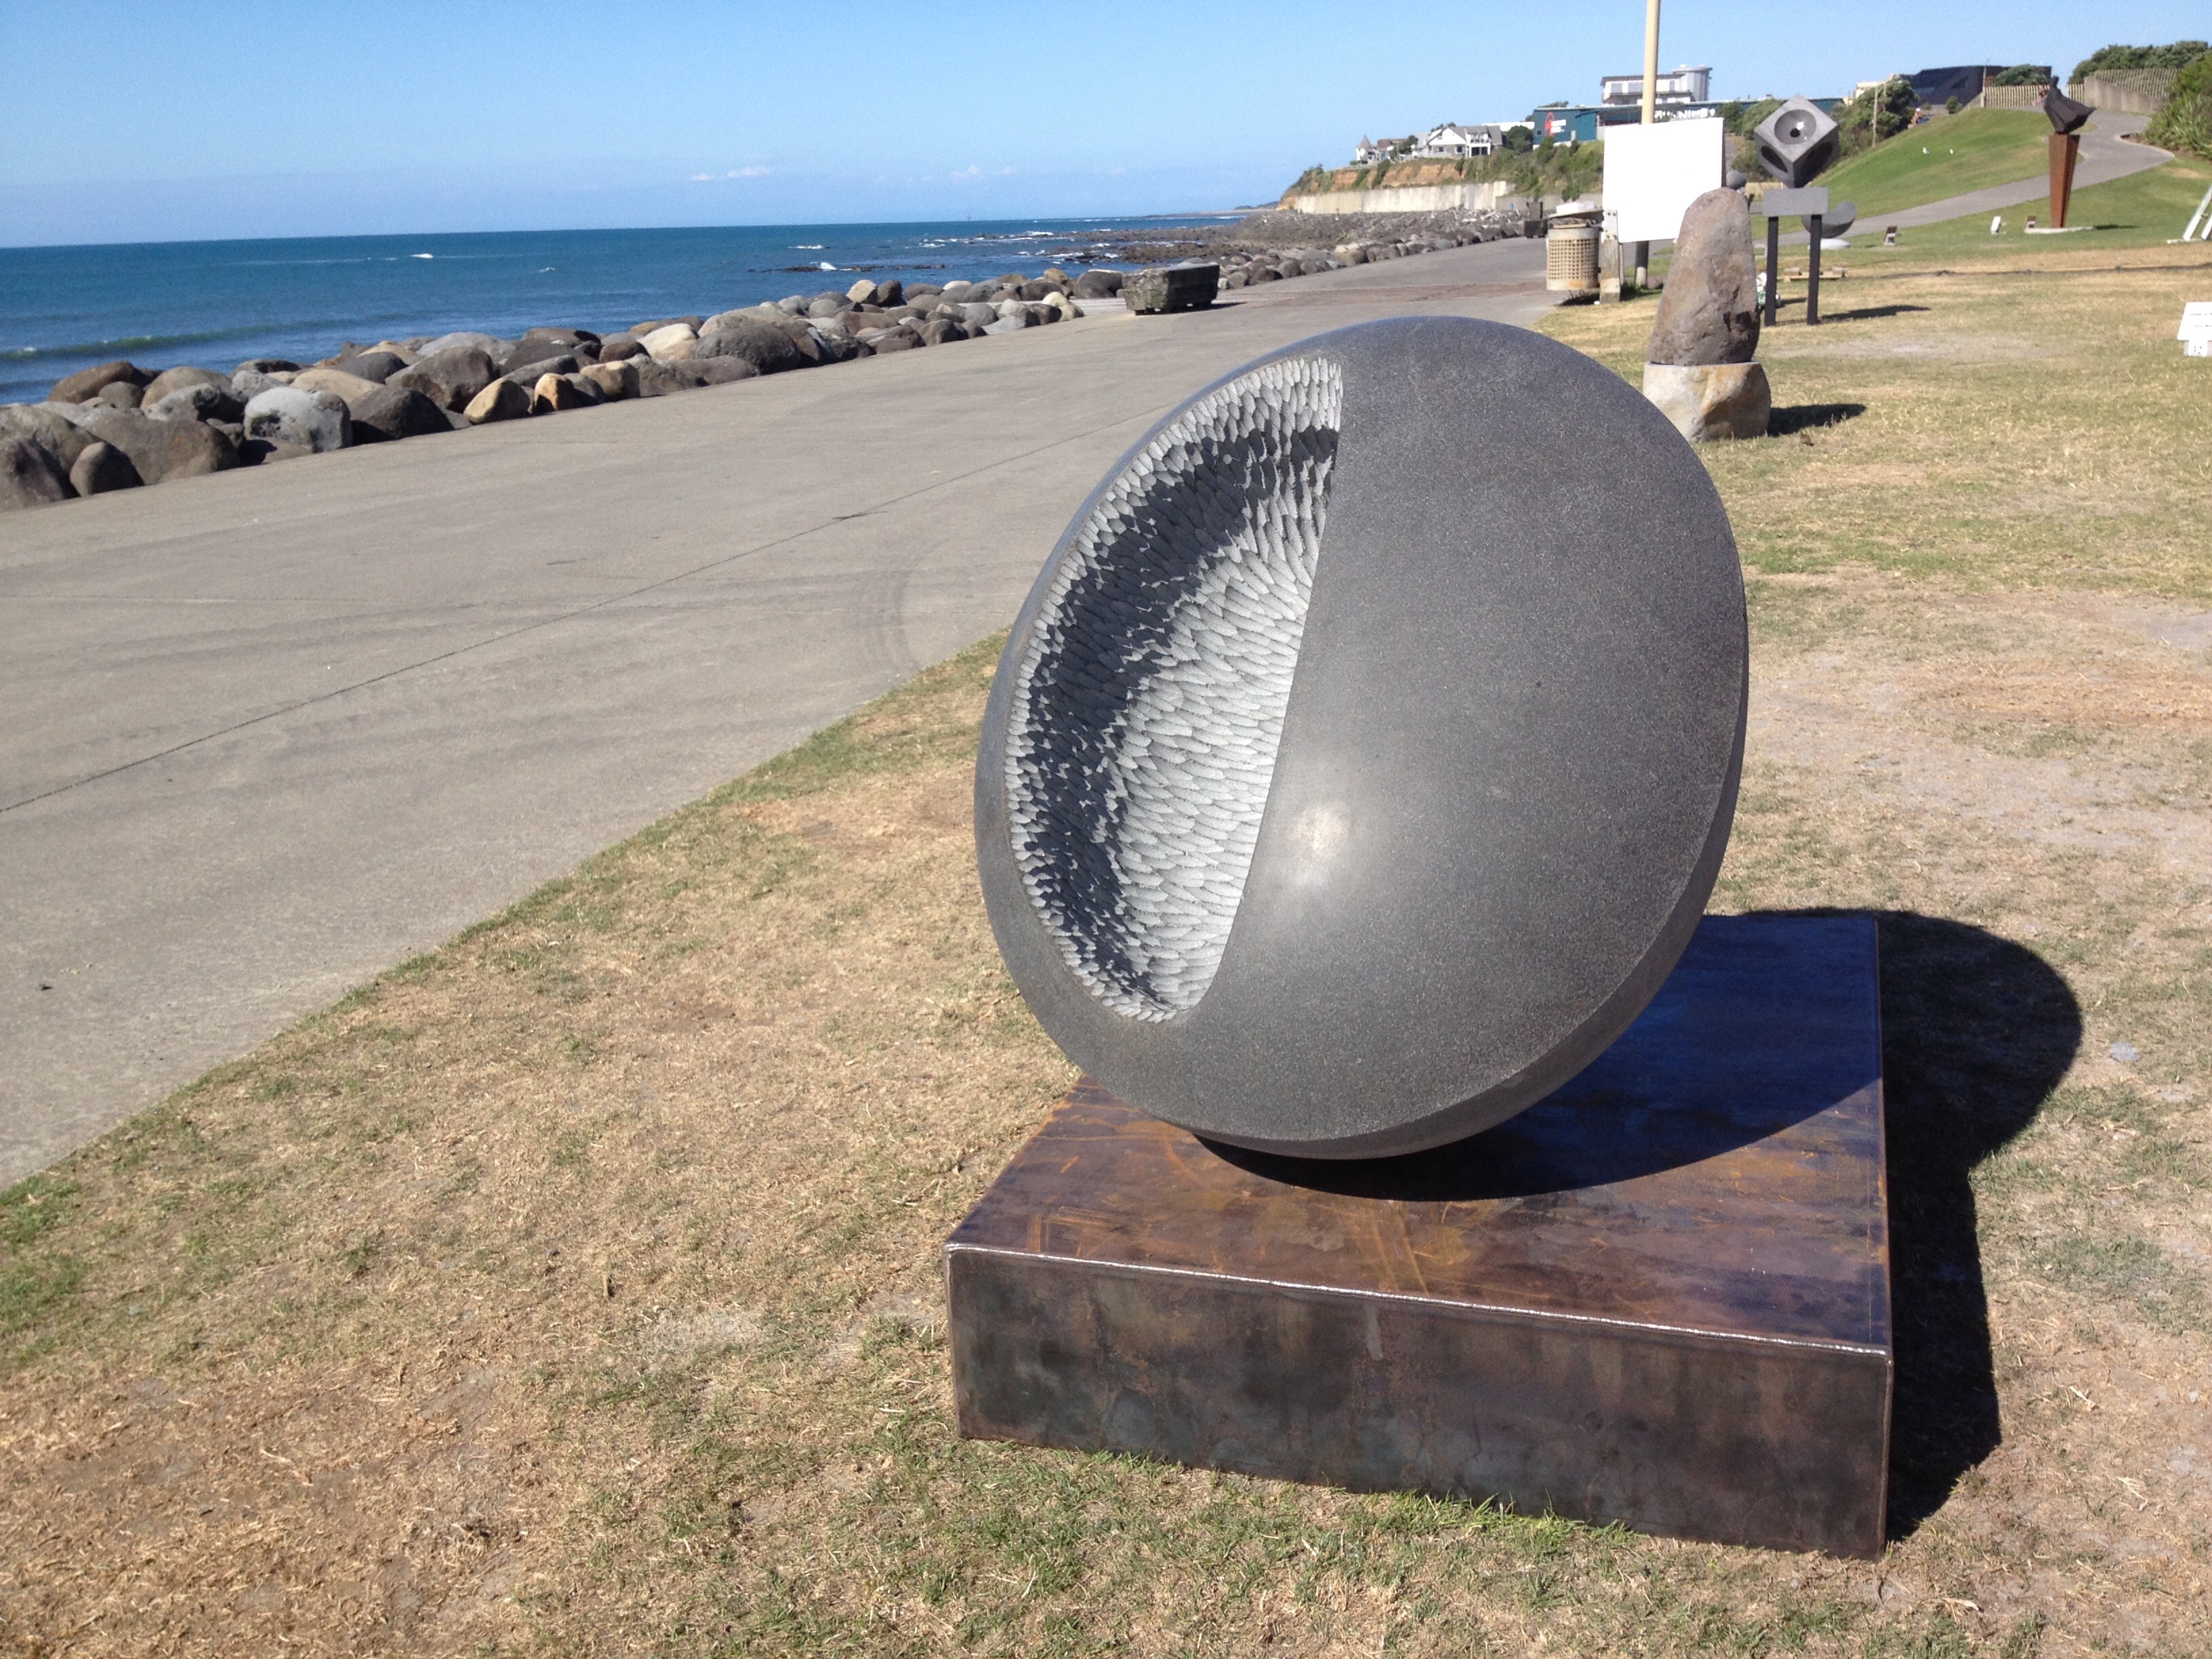 'anoia' - carved at the Te Kupenga stone sculpture symposium in New Plymouth, New Zealand, January 2016.